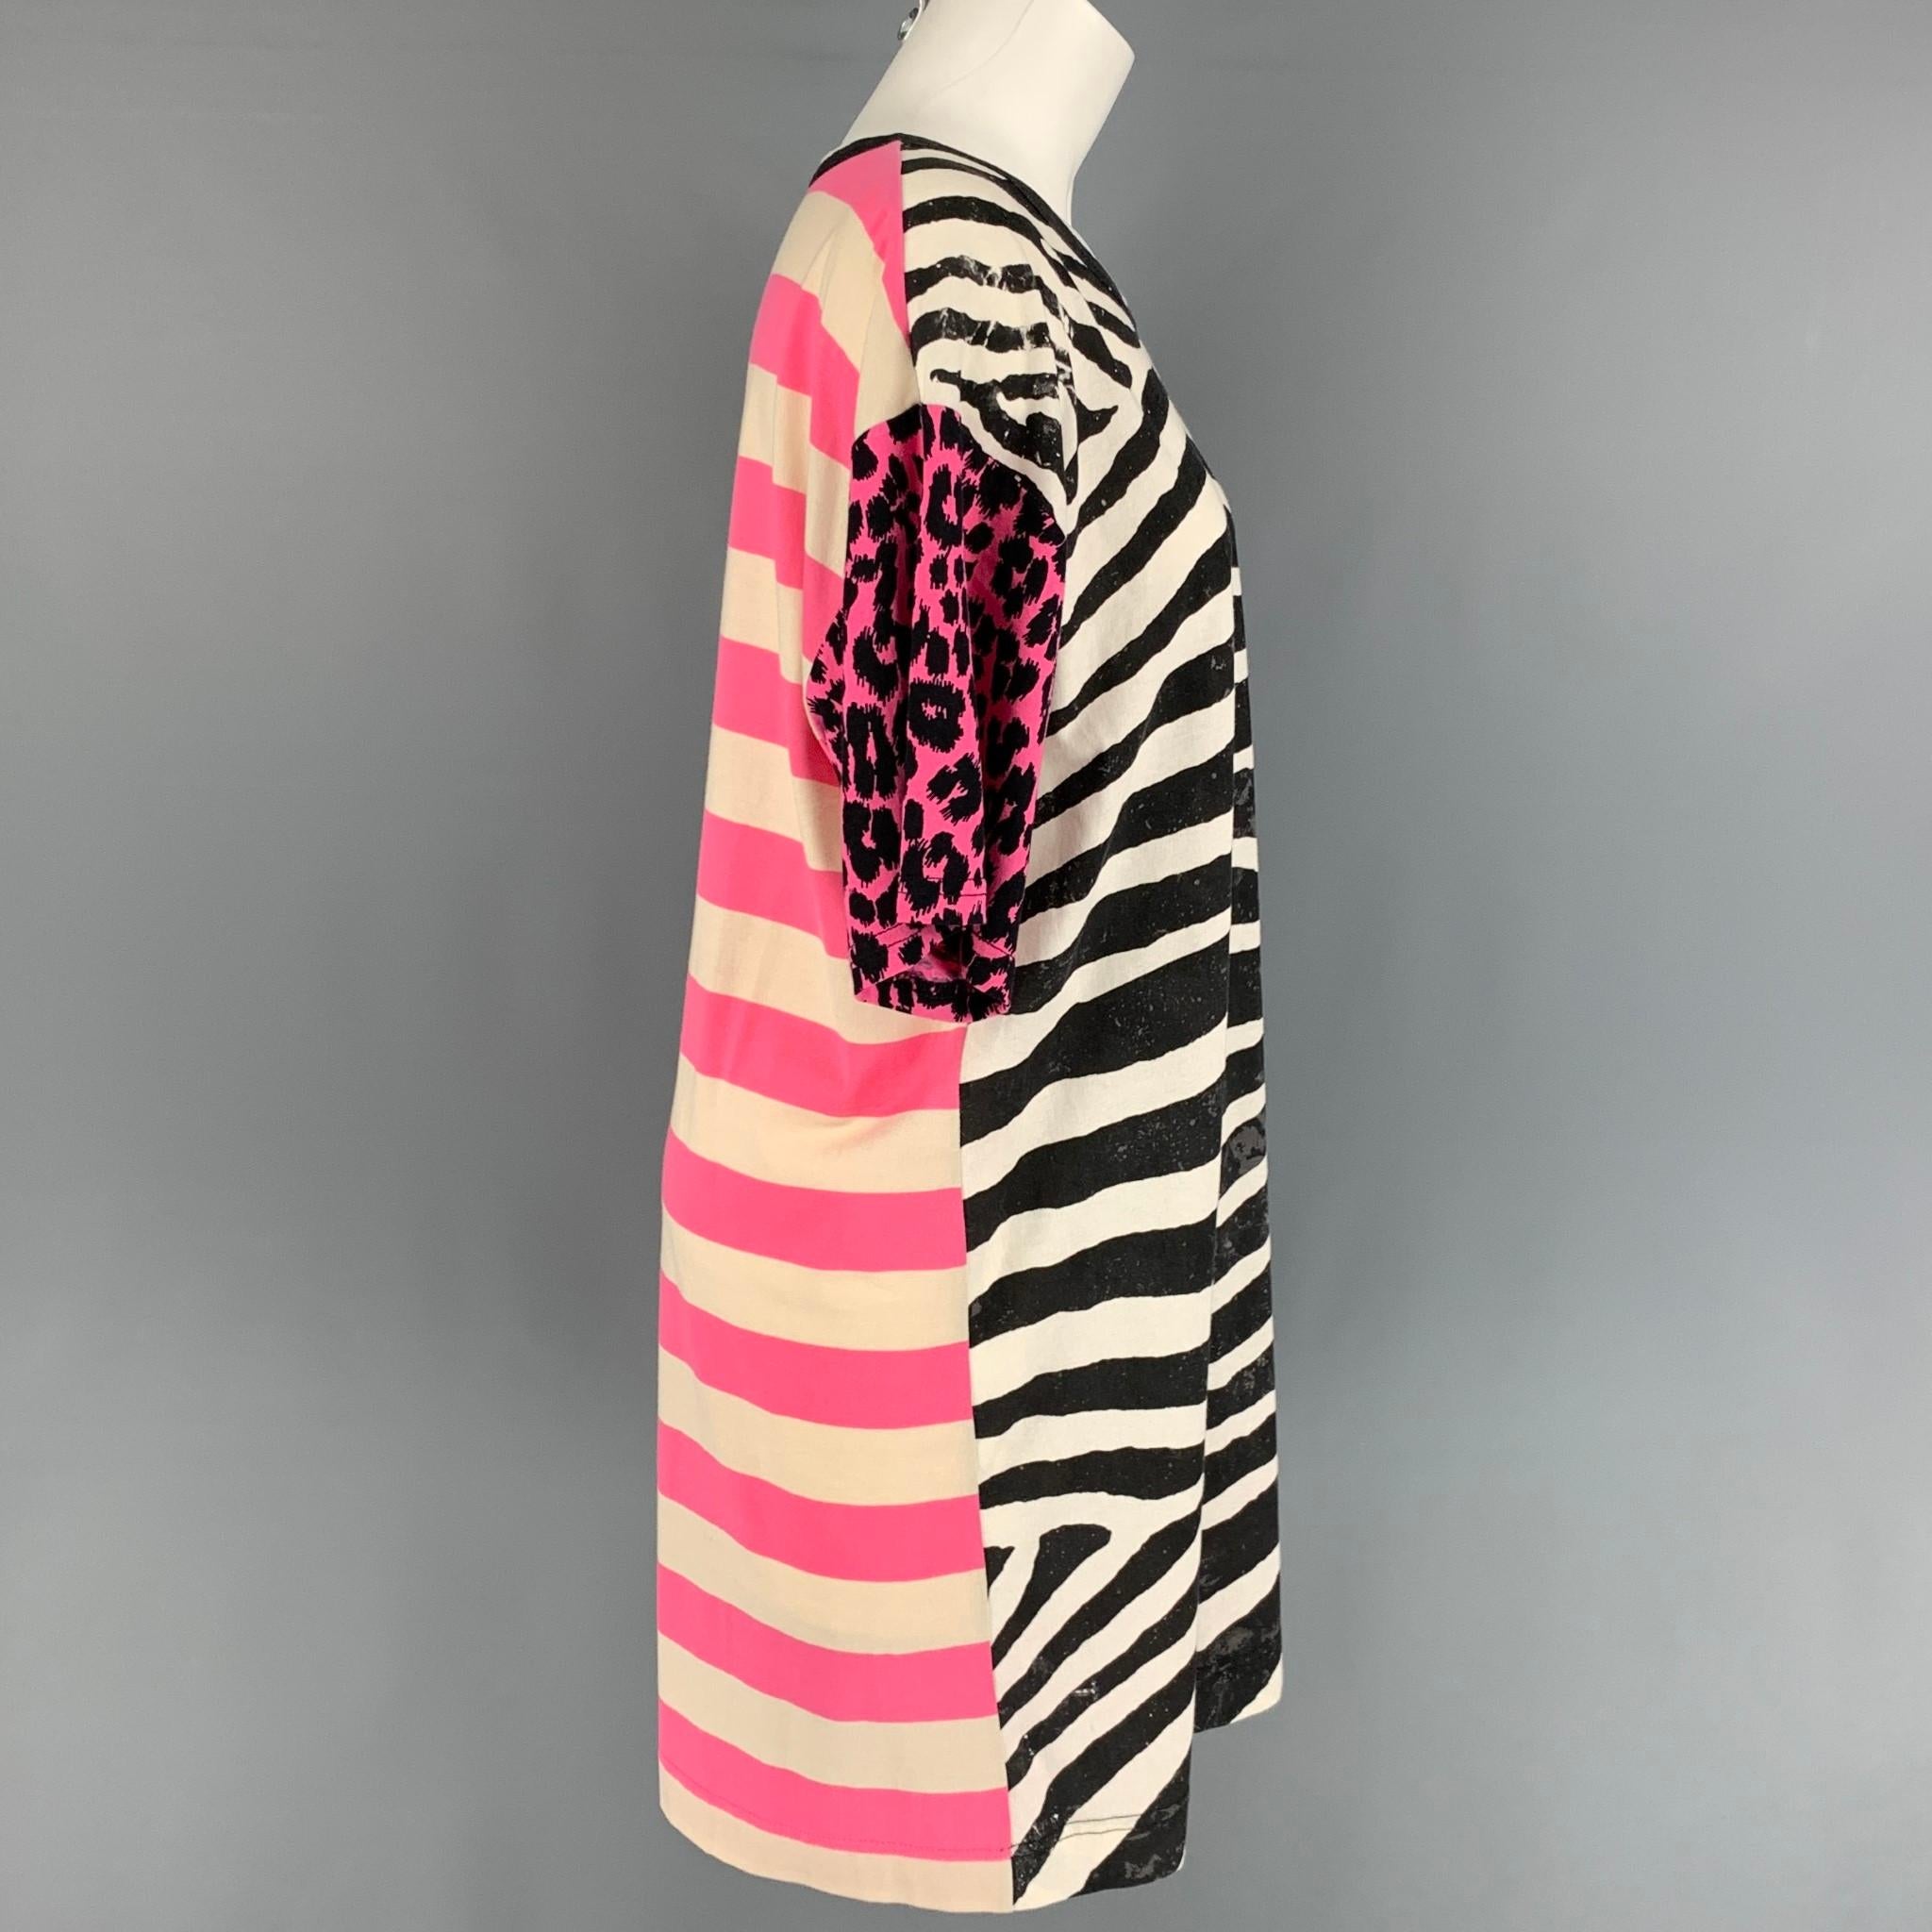 MARC JACOBS t-shirt dress comes in a multi-color mixed print material featuring a oversized fit, short sleeves, and a crew-neck. 

Very Good Pre-Owned Condition.
Marked: XS

Measurements:

Shoulder: 22 in.
Bust: 42 in.
Sleeve: 9 in.
Length: 35.5 in. 